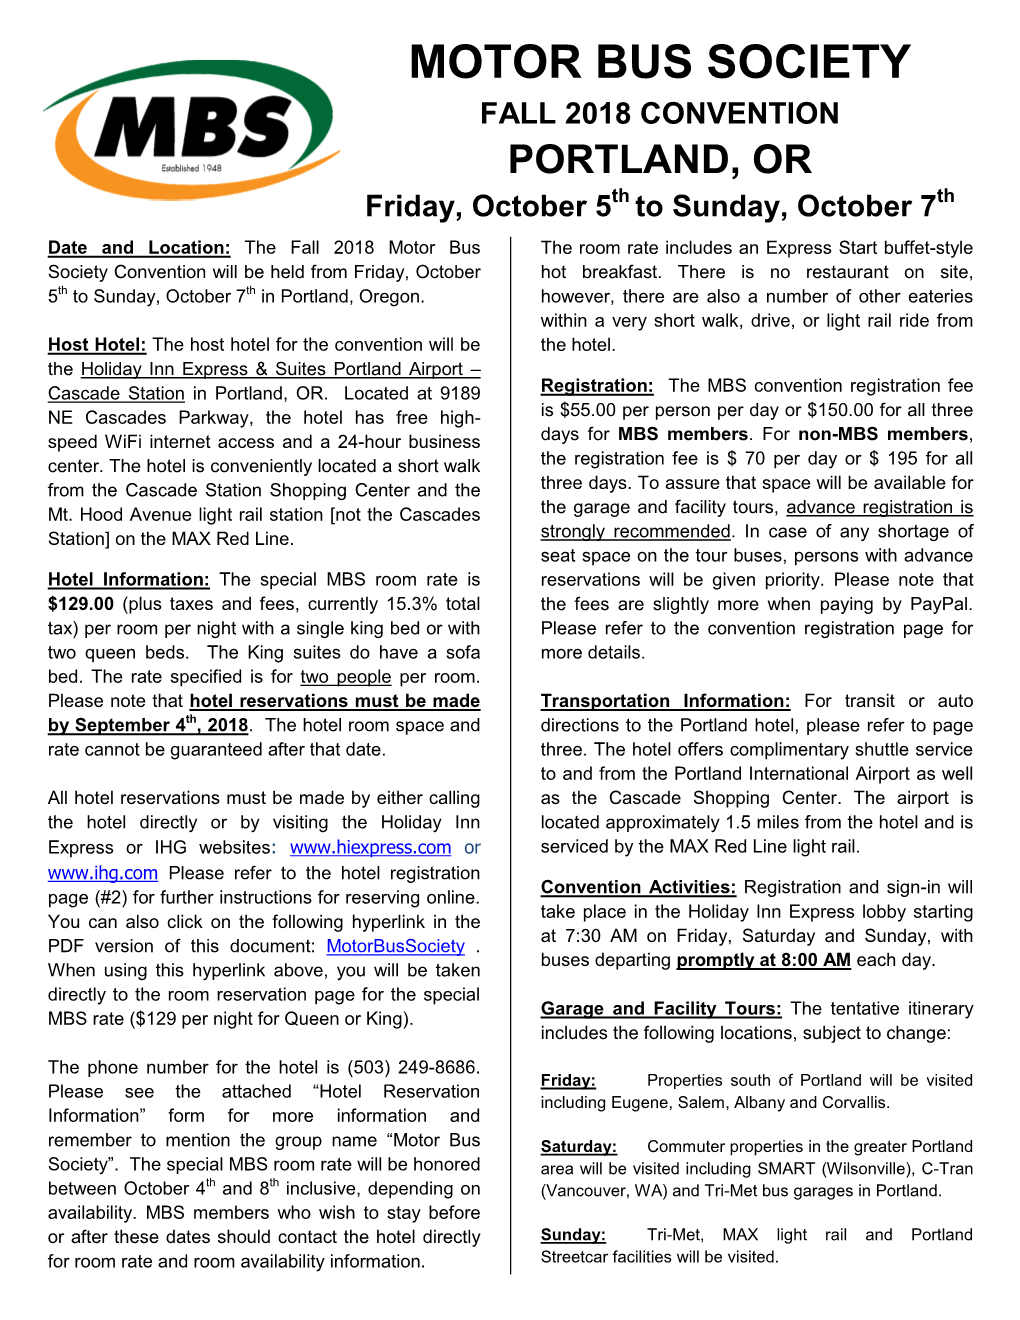 FALL 2018 CONVENTION – PORTLAND, OR Friday, October 5Th to Sunday, October 7Th Attendance Registration Form